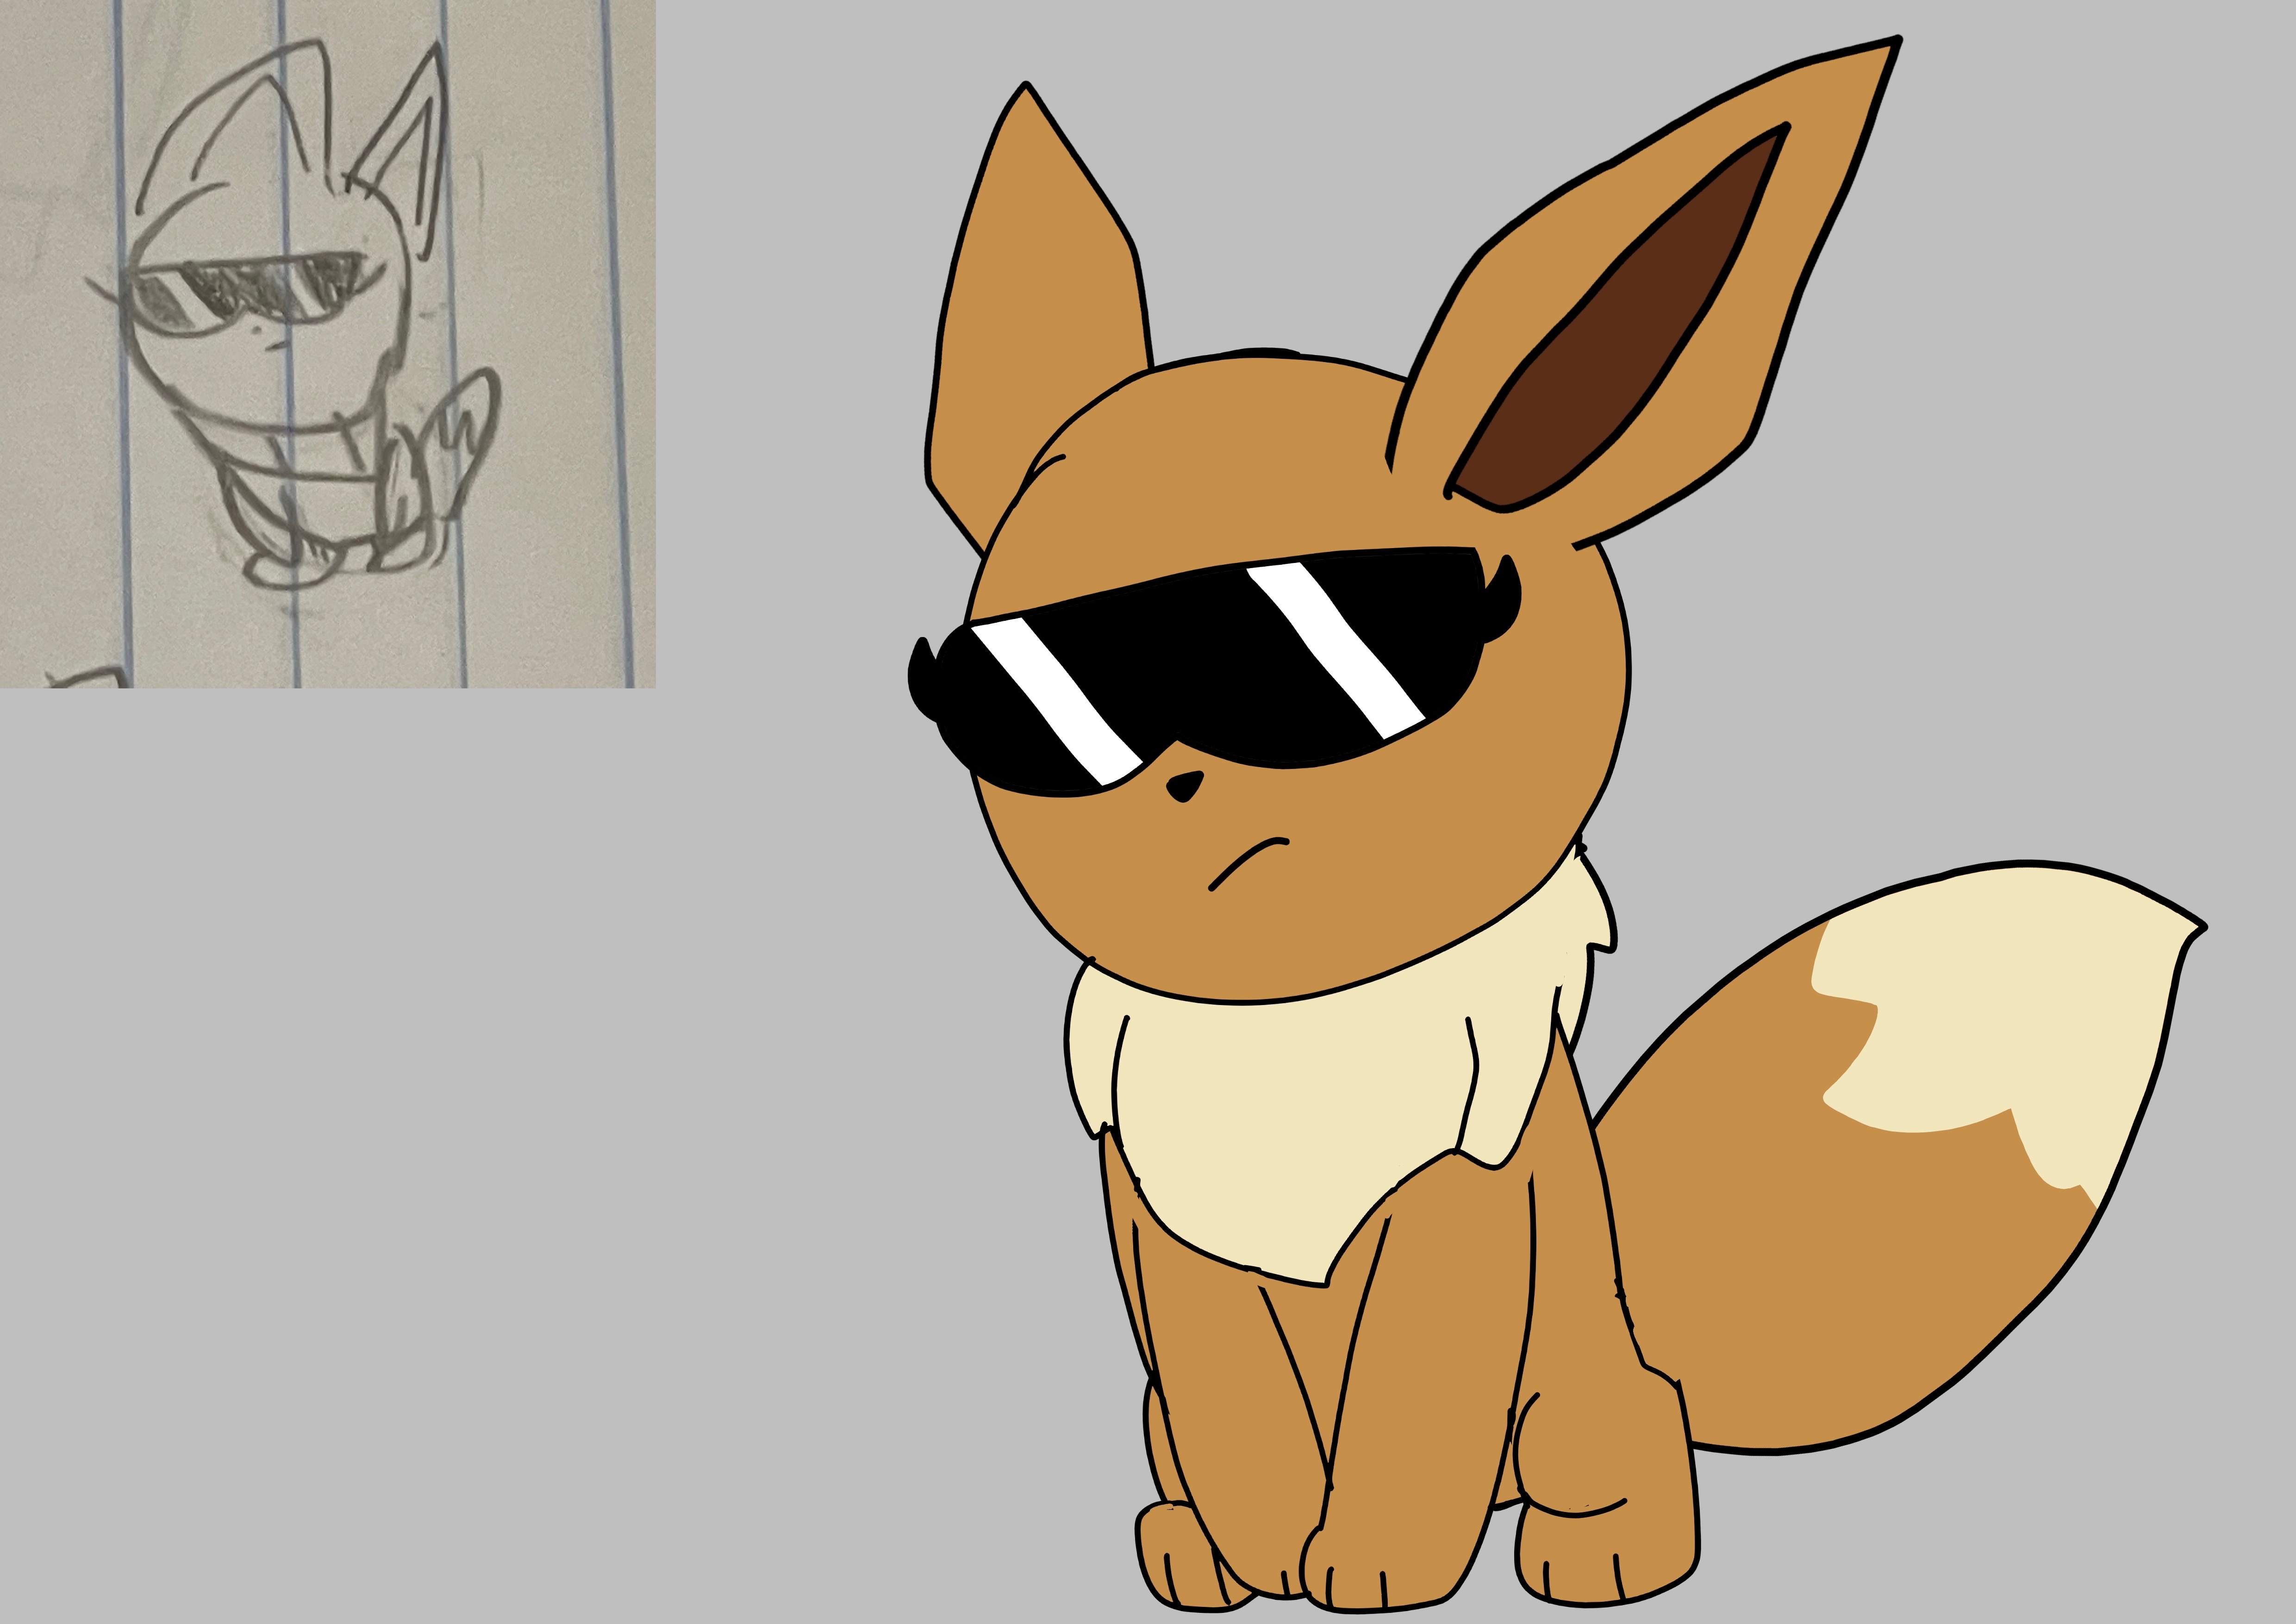 A very cool Eevee by Sketchyboi25 on DeviantArt